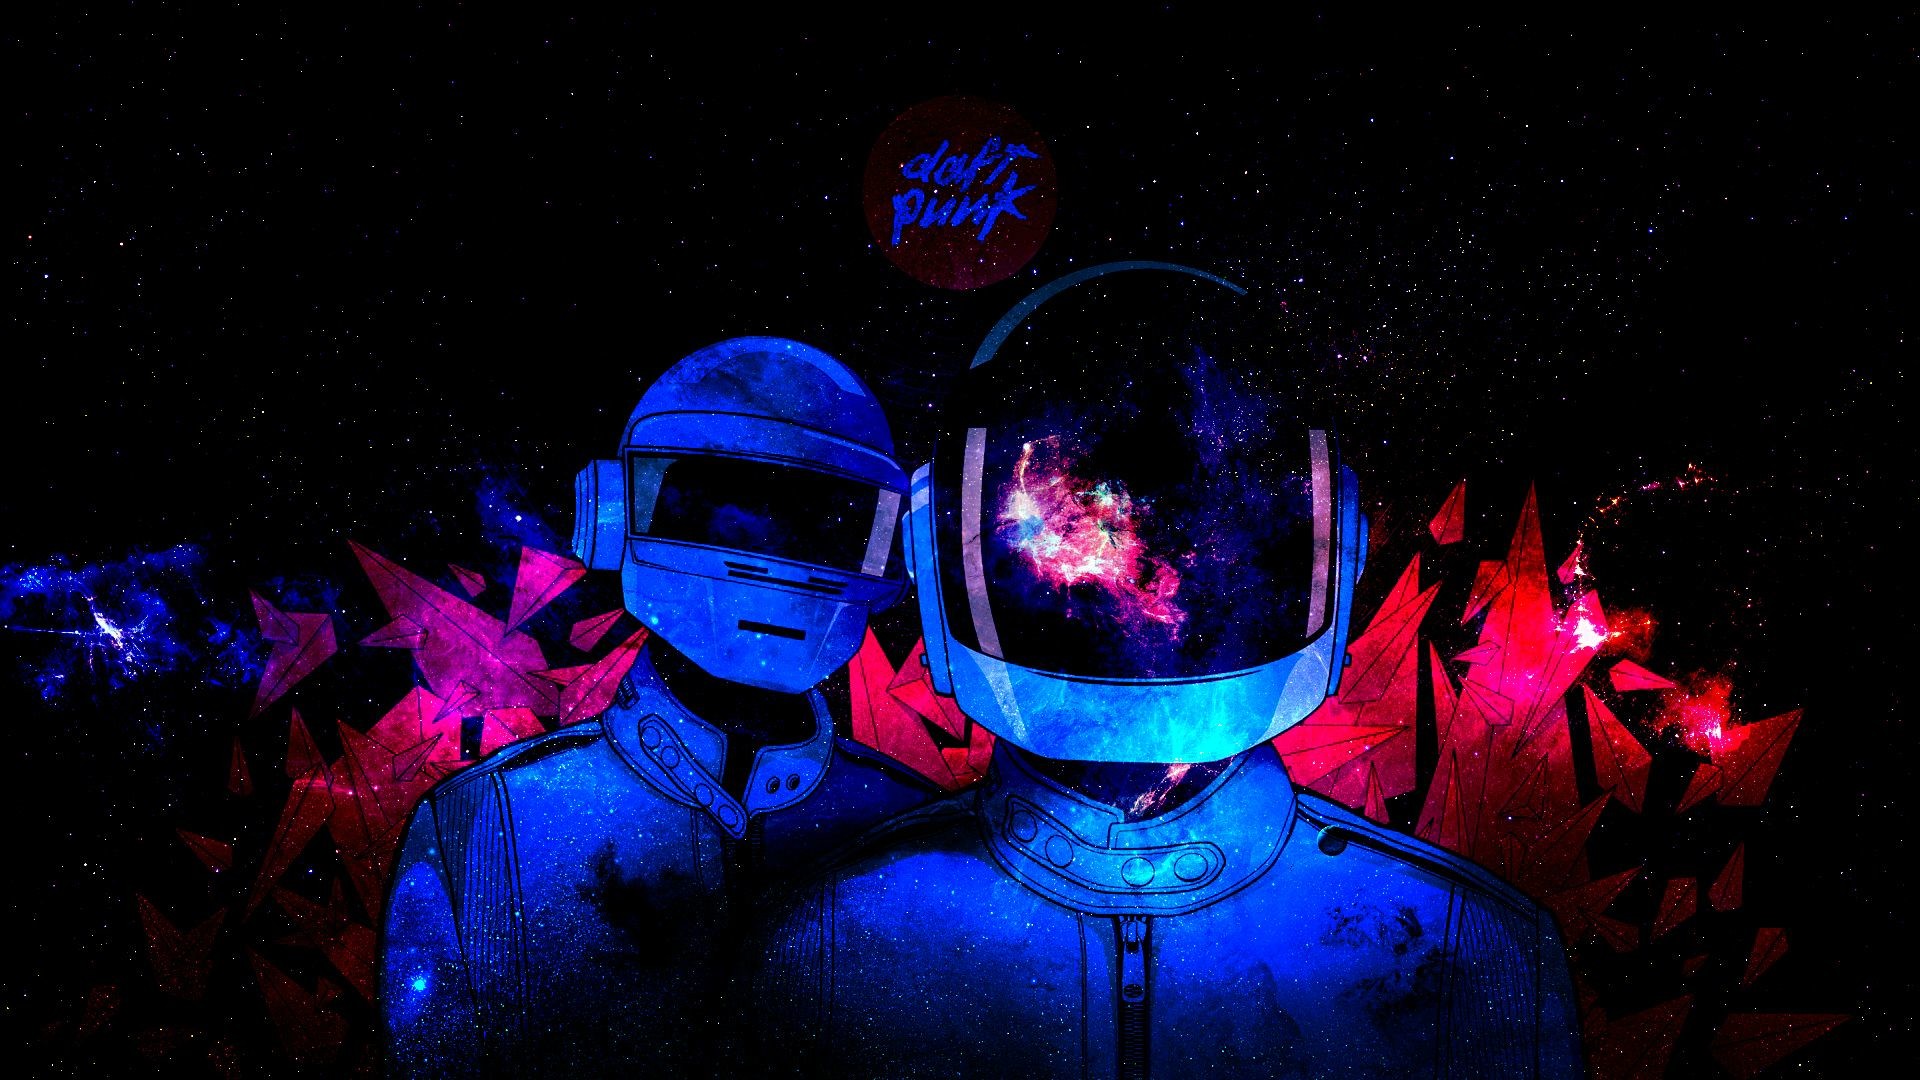 1920x1080 Daft Punk Wallpapers High Quality Download Free | HD Wallpapers | Pinterest  | Daft punk, Hd wallpaper and Wallpaper